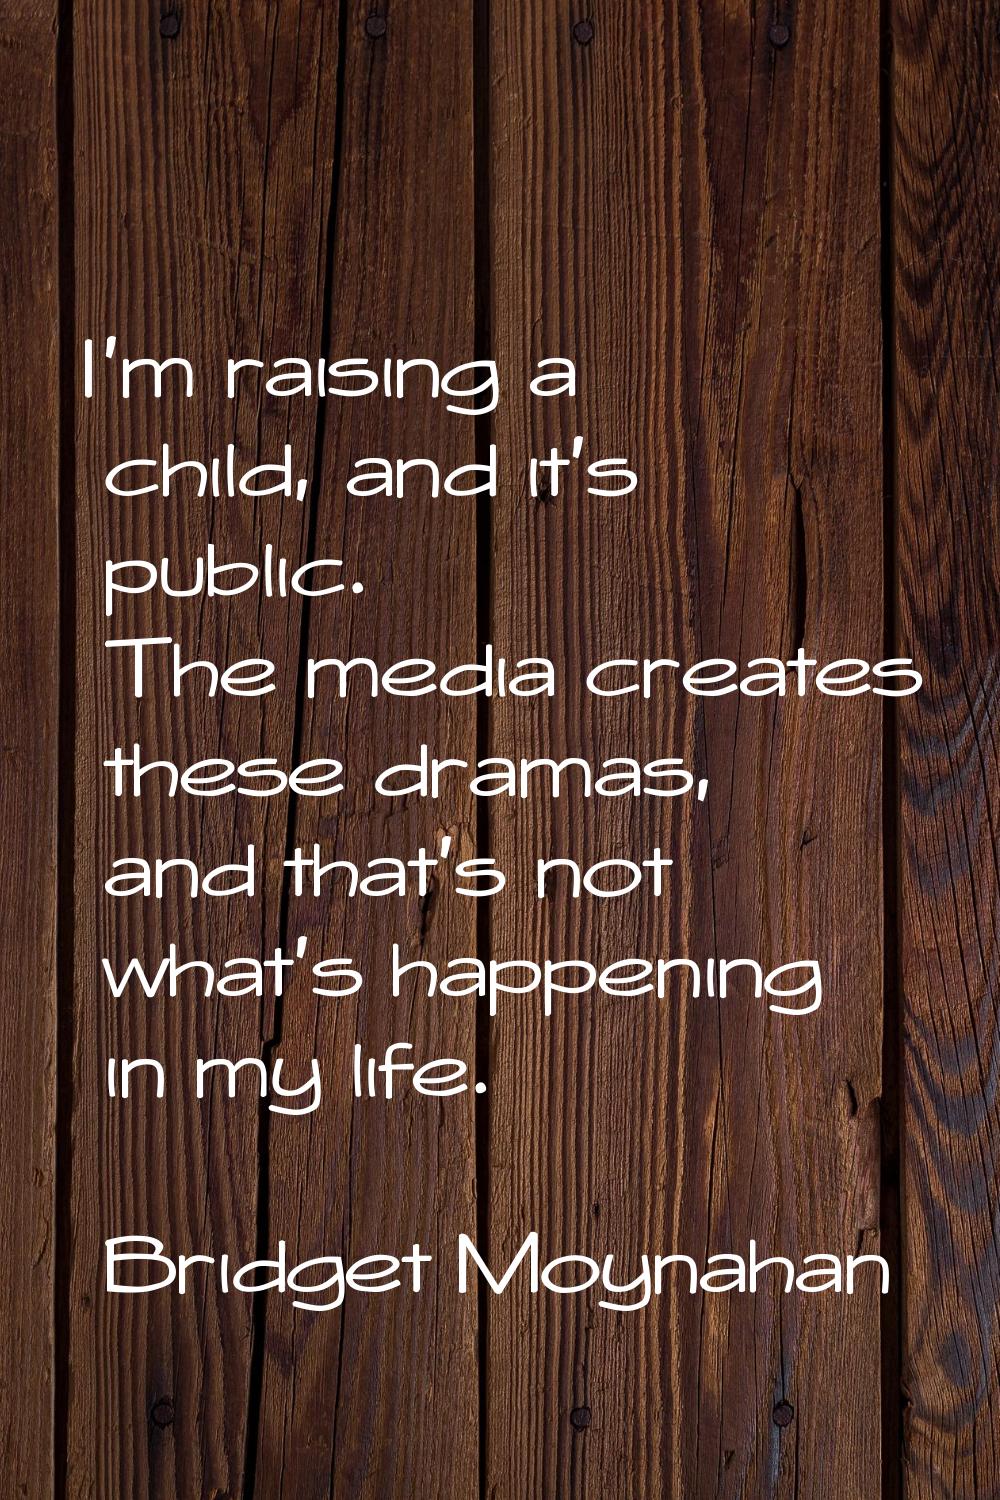 I'm raising a child, and it's public. The media creates these dramas, and that's not what's happeni